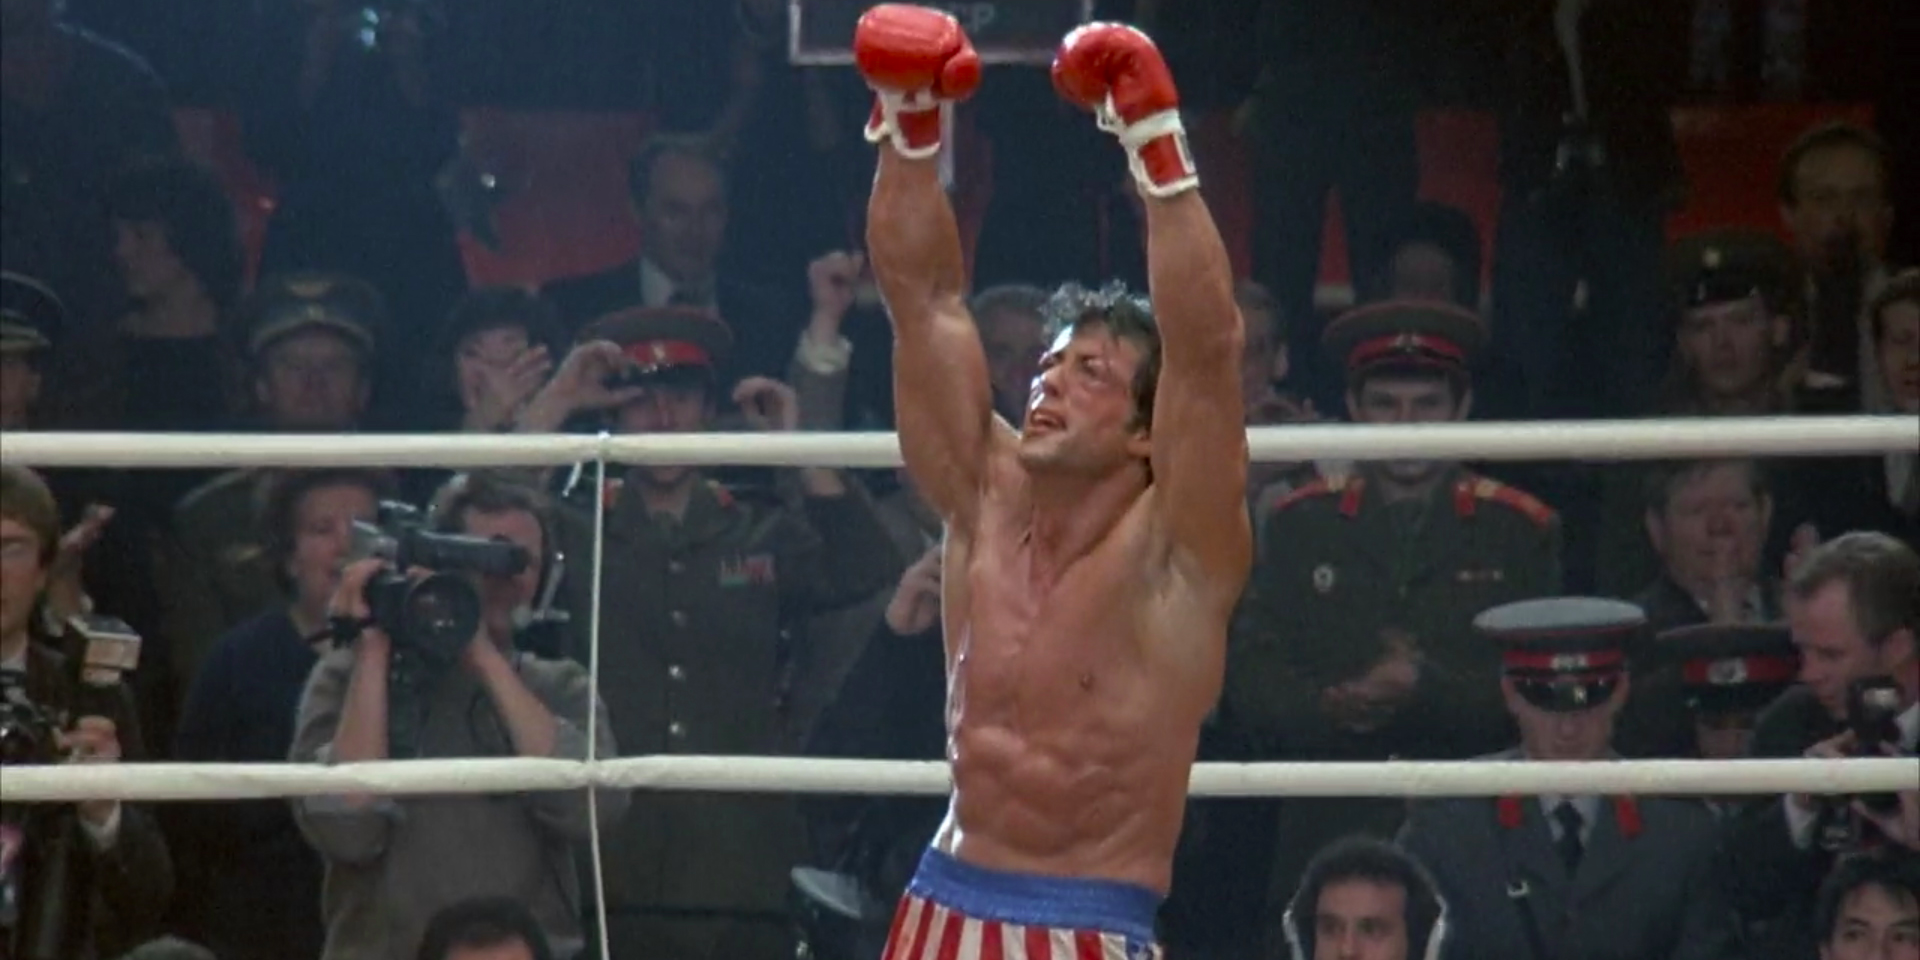 rocky-goes-on-to-avenge-his-friend-by-beating-drago-in-a-match-in-the-soviet-union.jpg